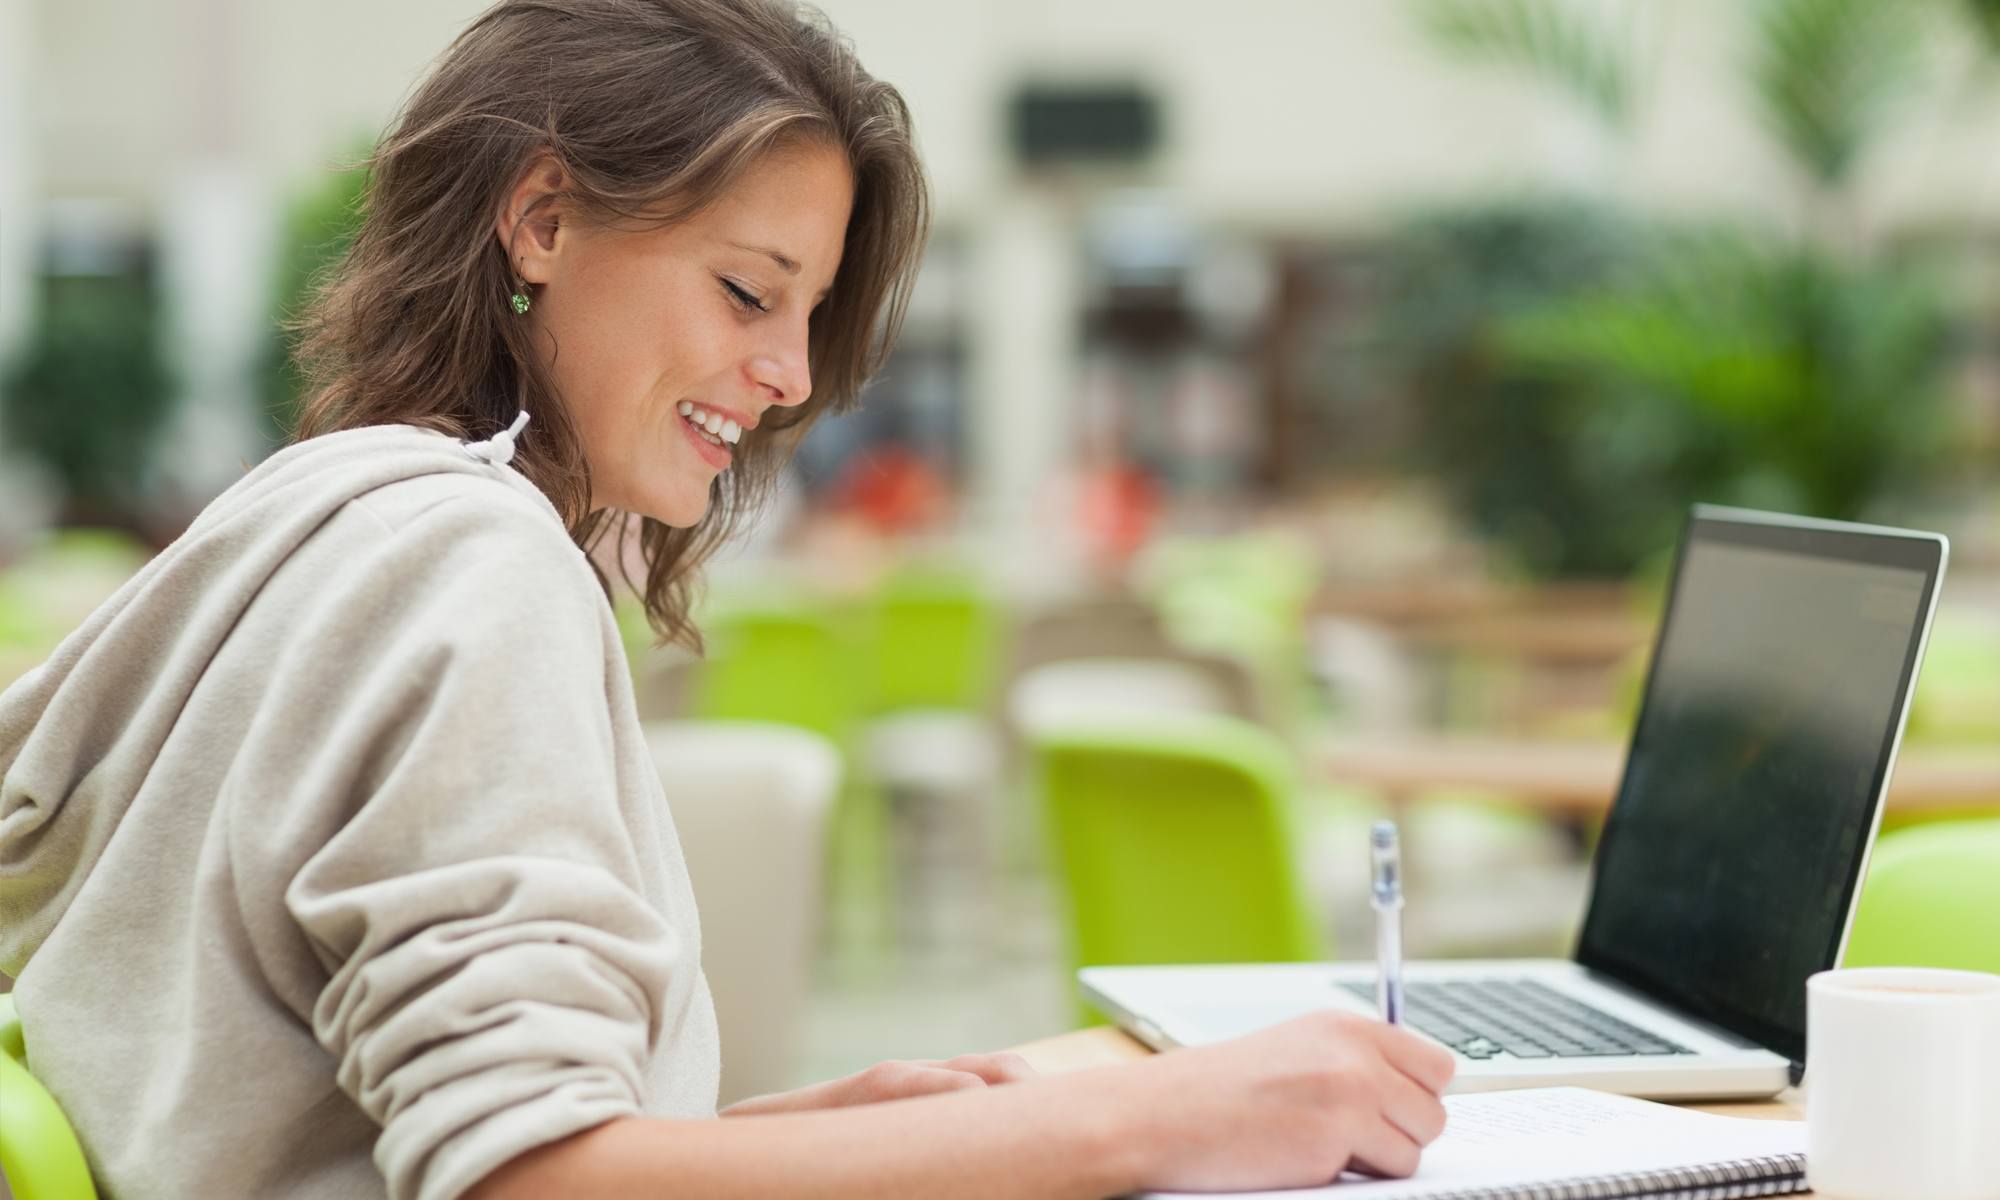 6 Useful Online Tutoring Sites to Boost Your Learning